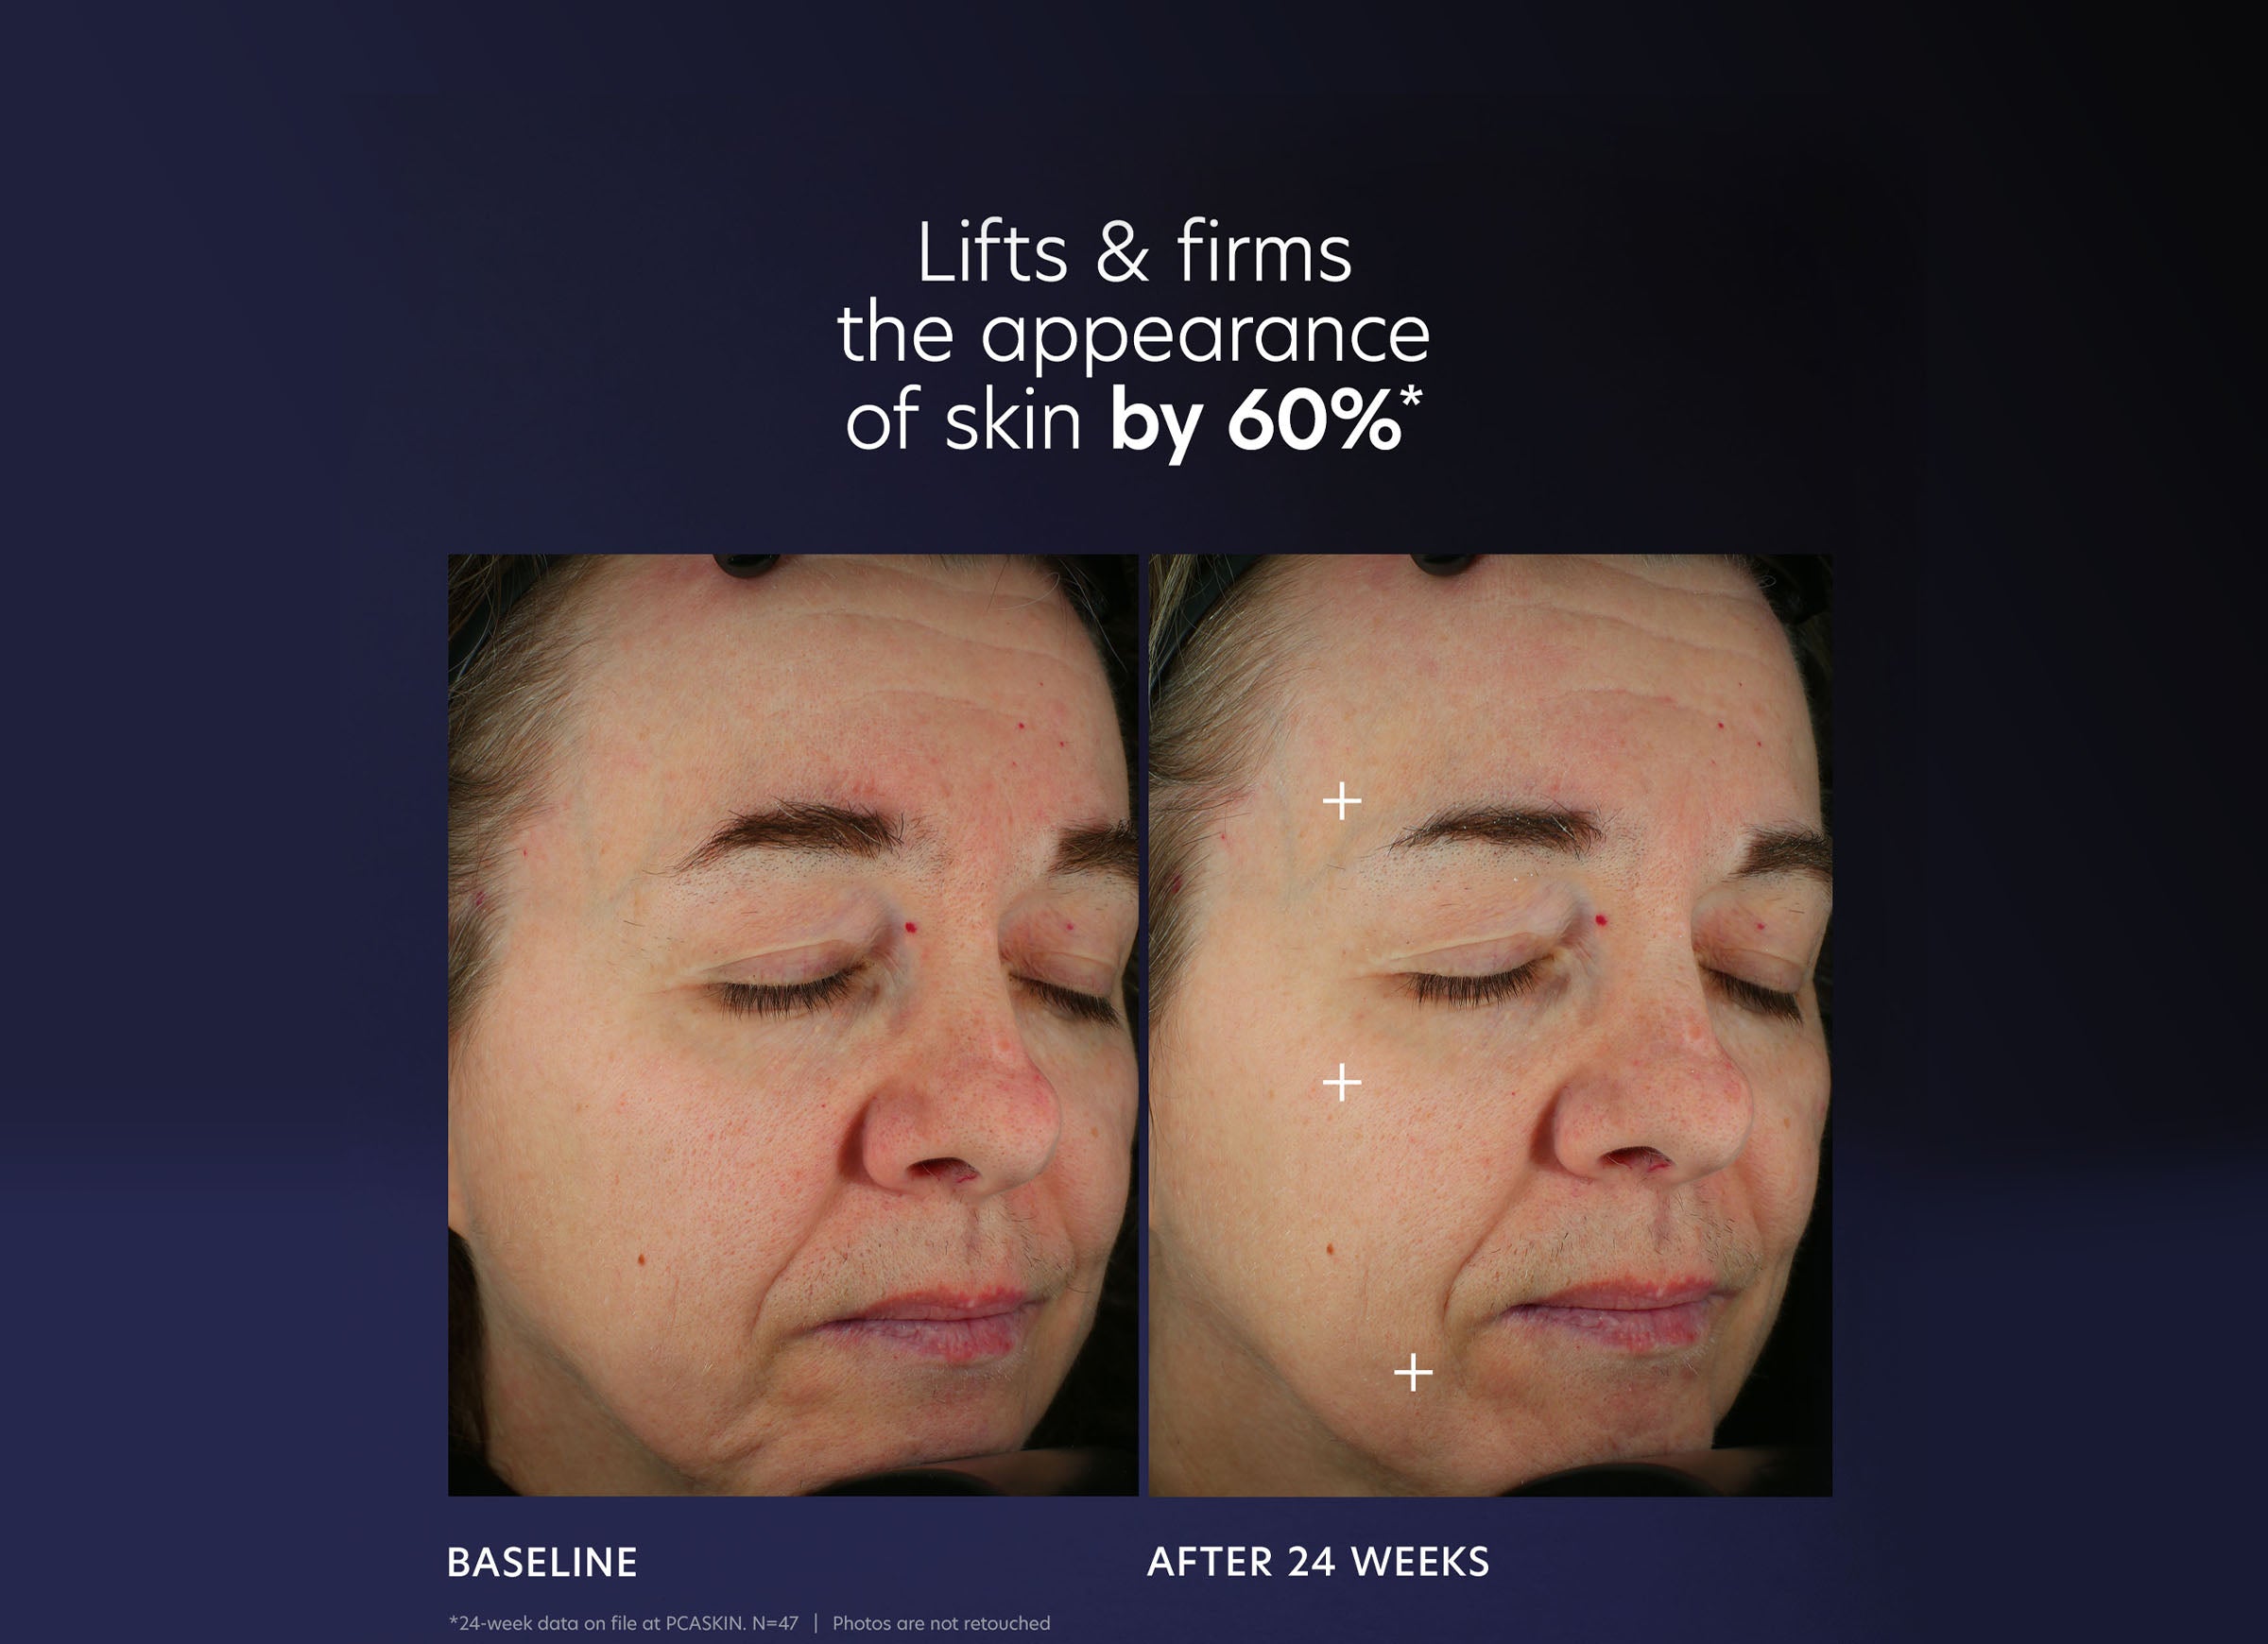 Pro-Max Age Renewal. B&A. 60% Lifts and firms 